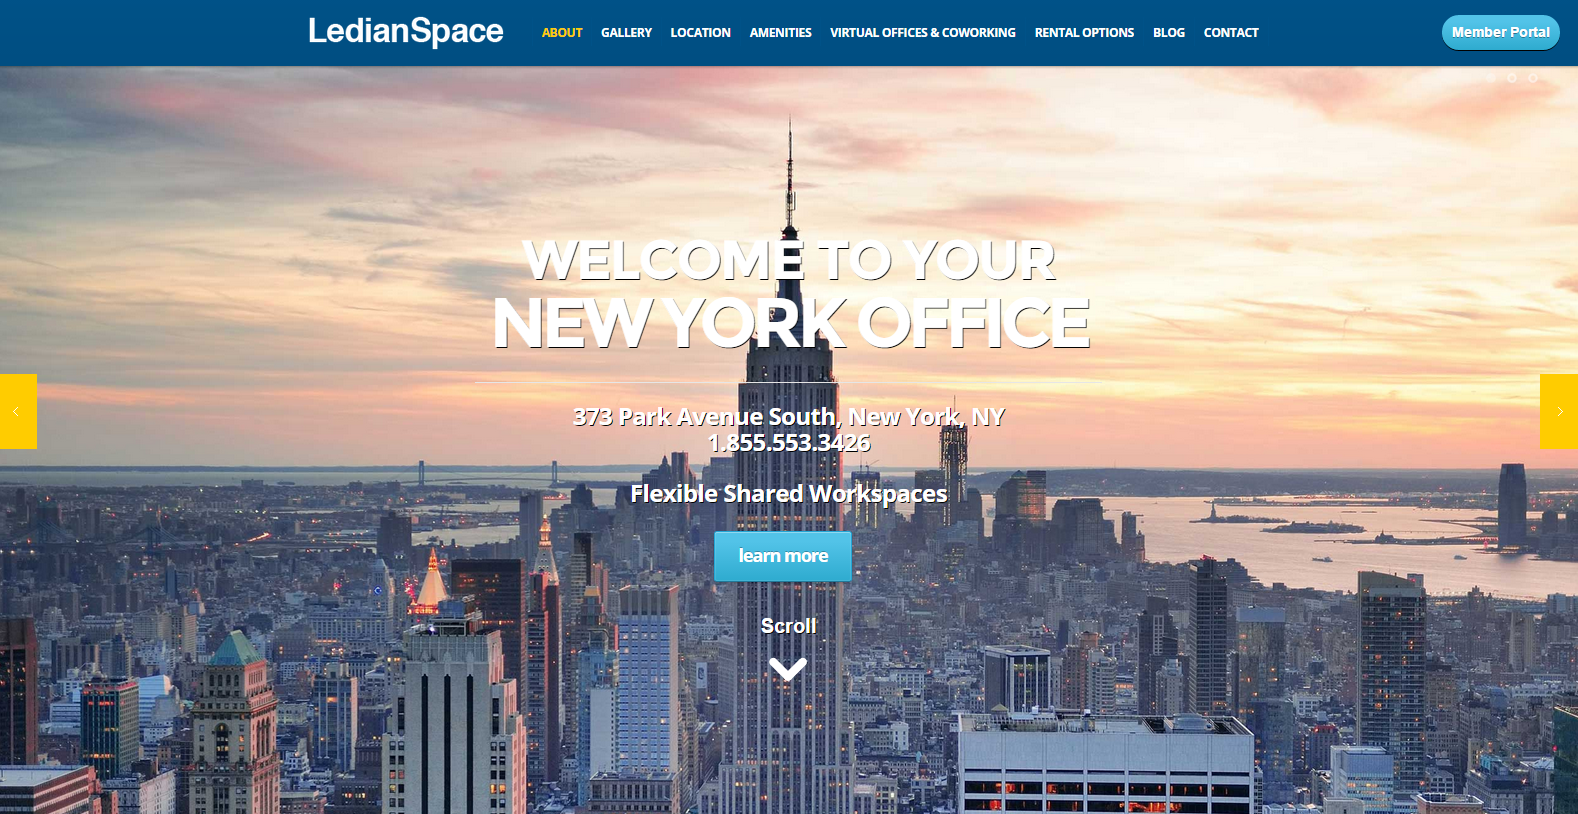 This website showcases a New York City office space. Sleek design and conversion-driven web development help promote this shared work space in New York City.